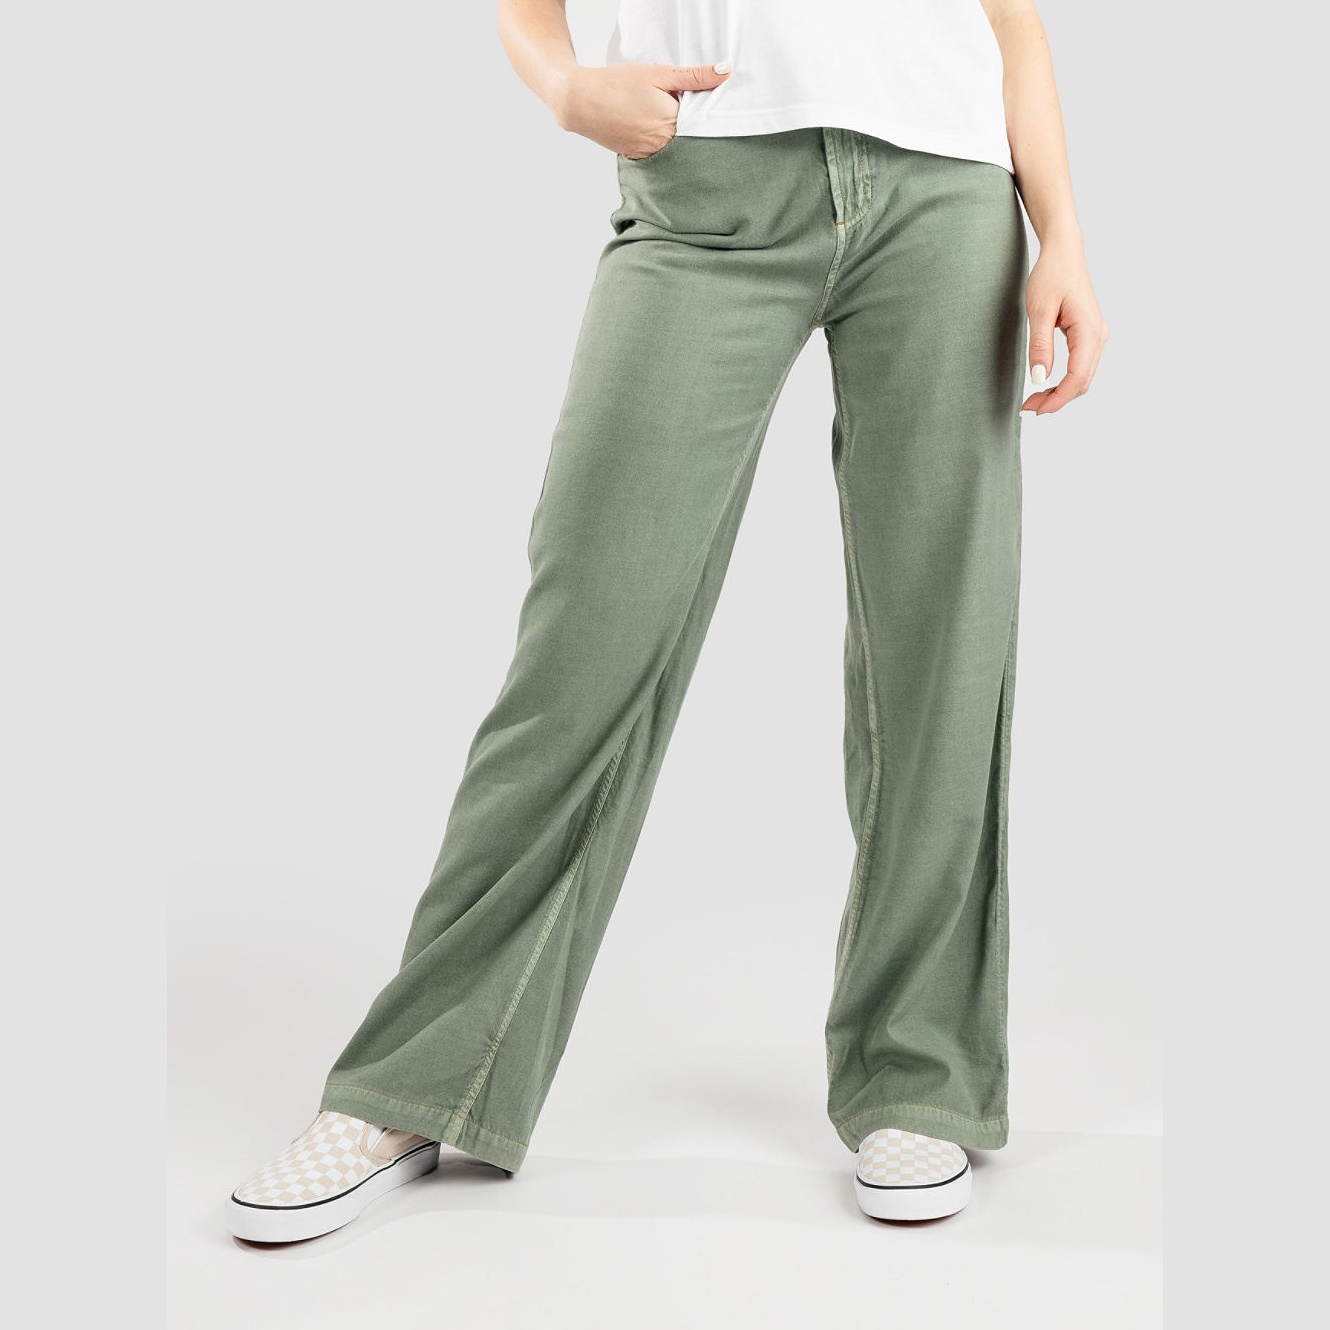 Rvca Coco Jade Jeans Femme